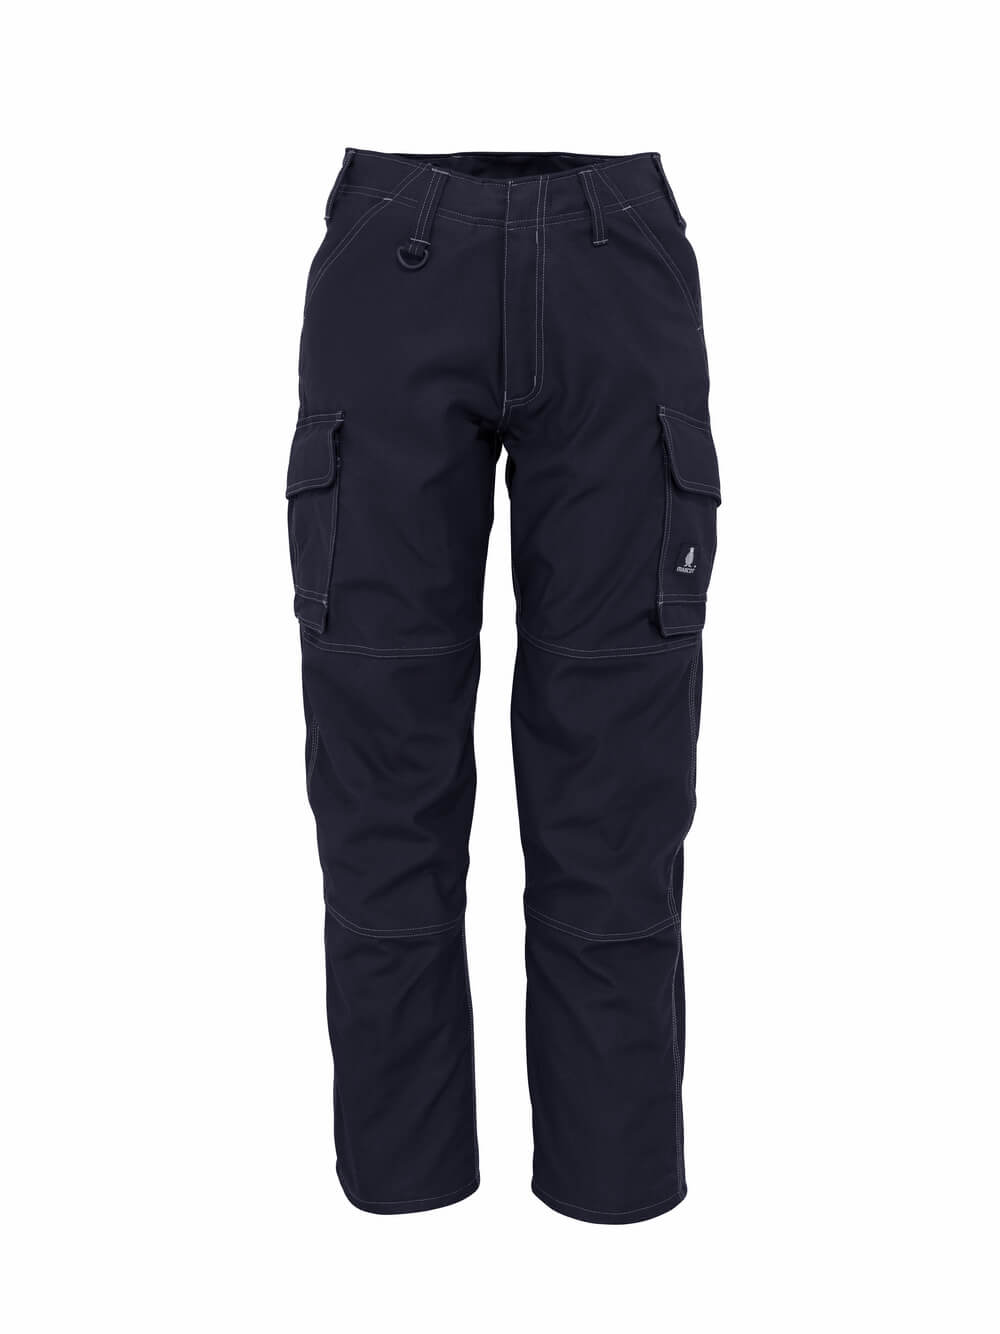 Mascot Workwear - Do you need work trousers that are good... | Facebook